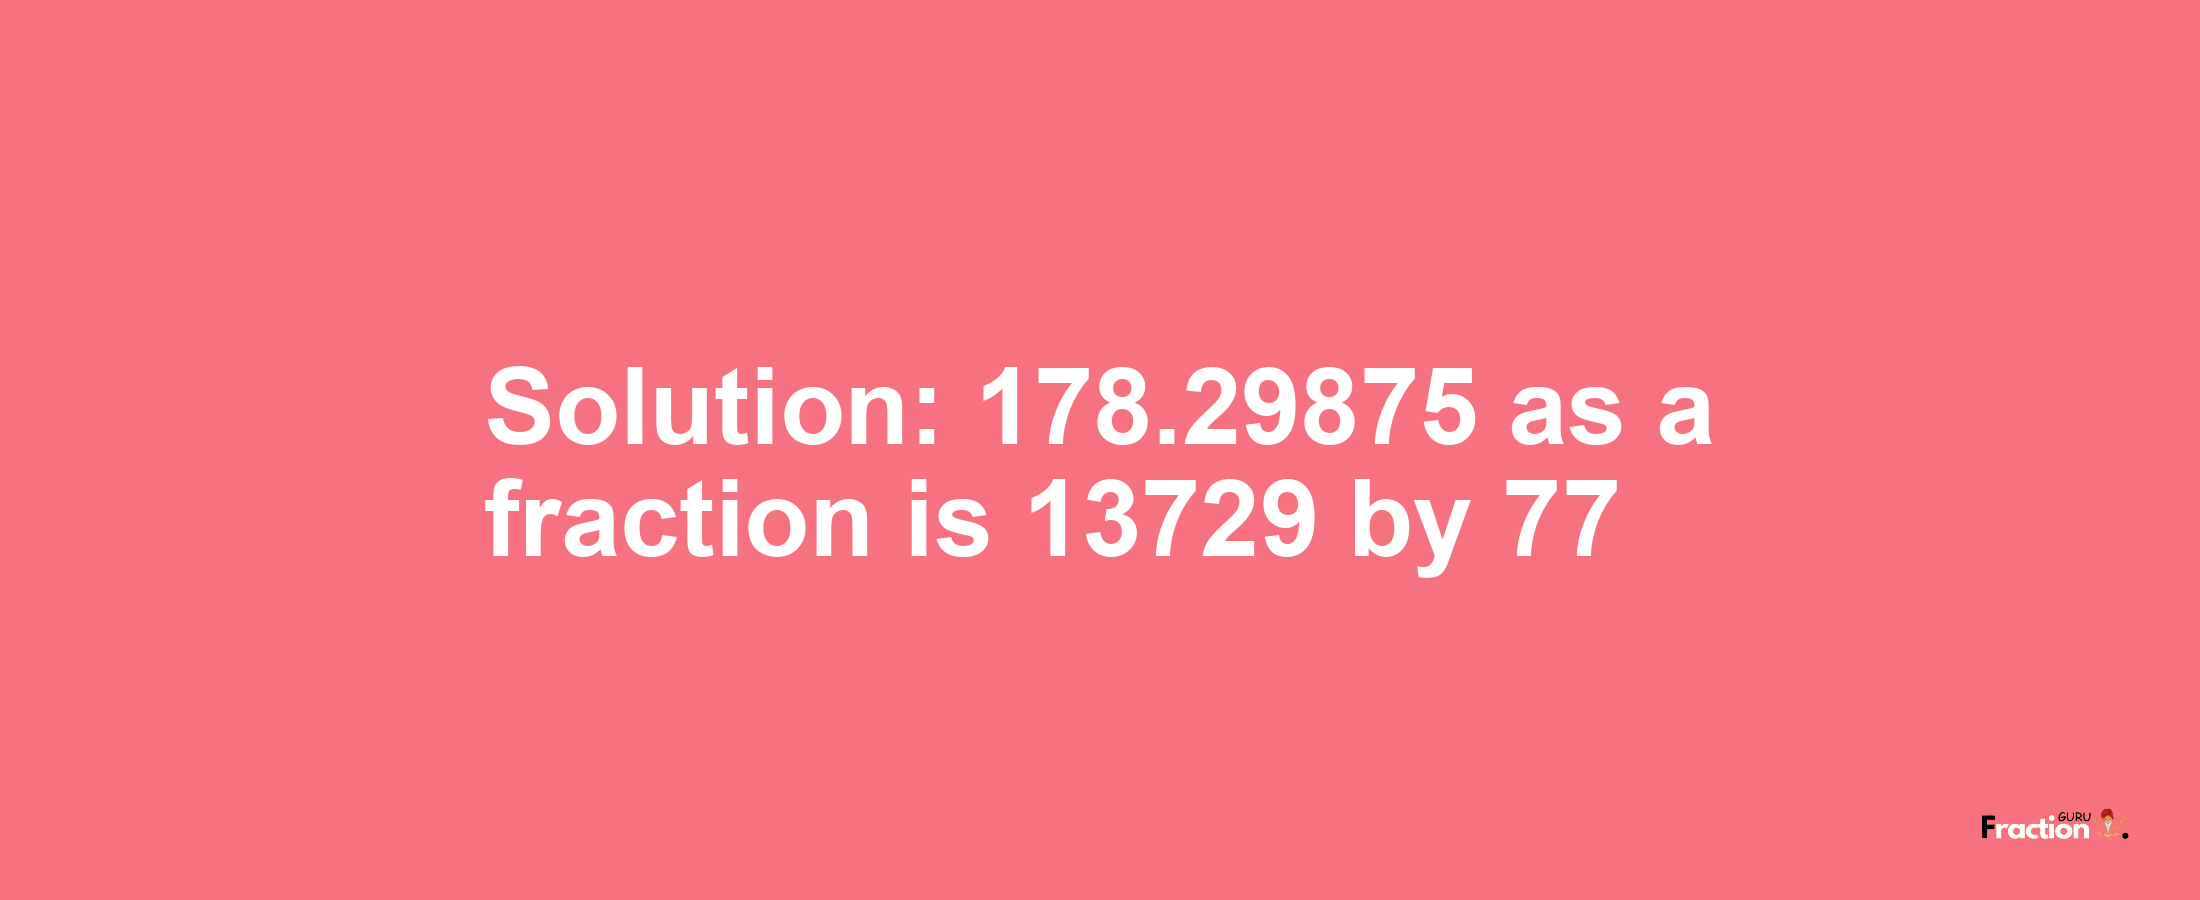 Solution:178.29875 as a fraction is 13729/77